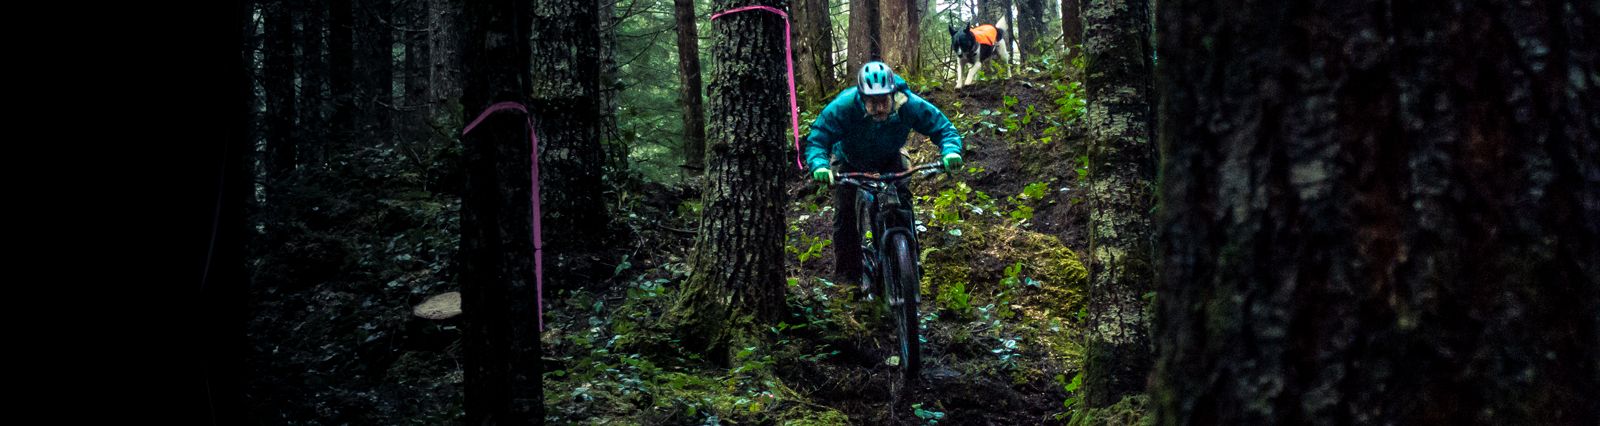 Evergreen’s 30th Anniversary Year Promises Bonanza of Trail Projects